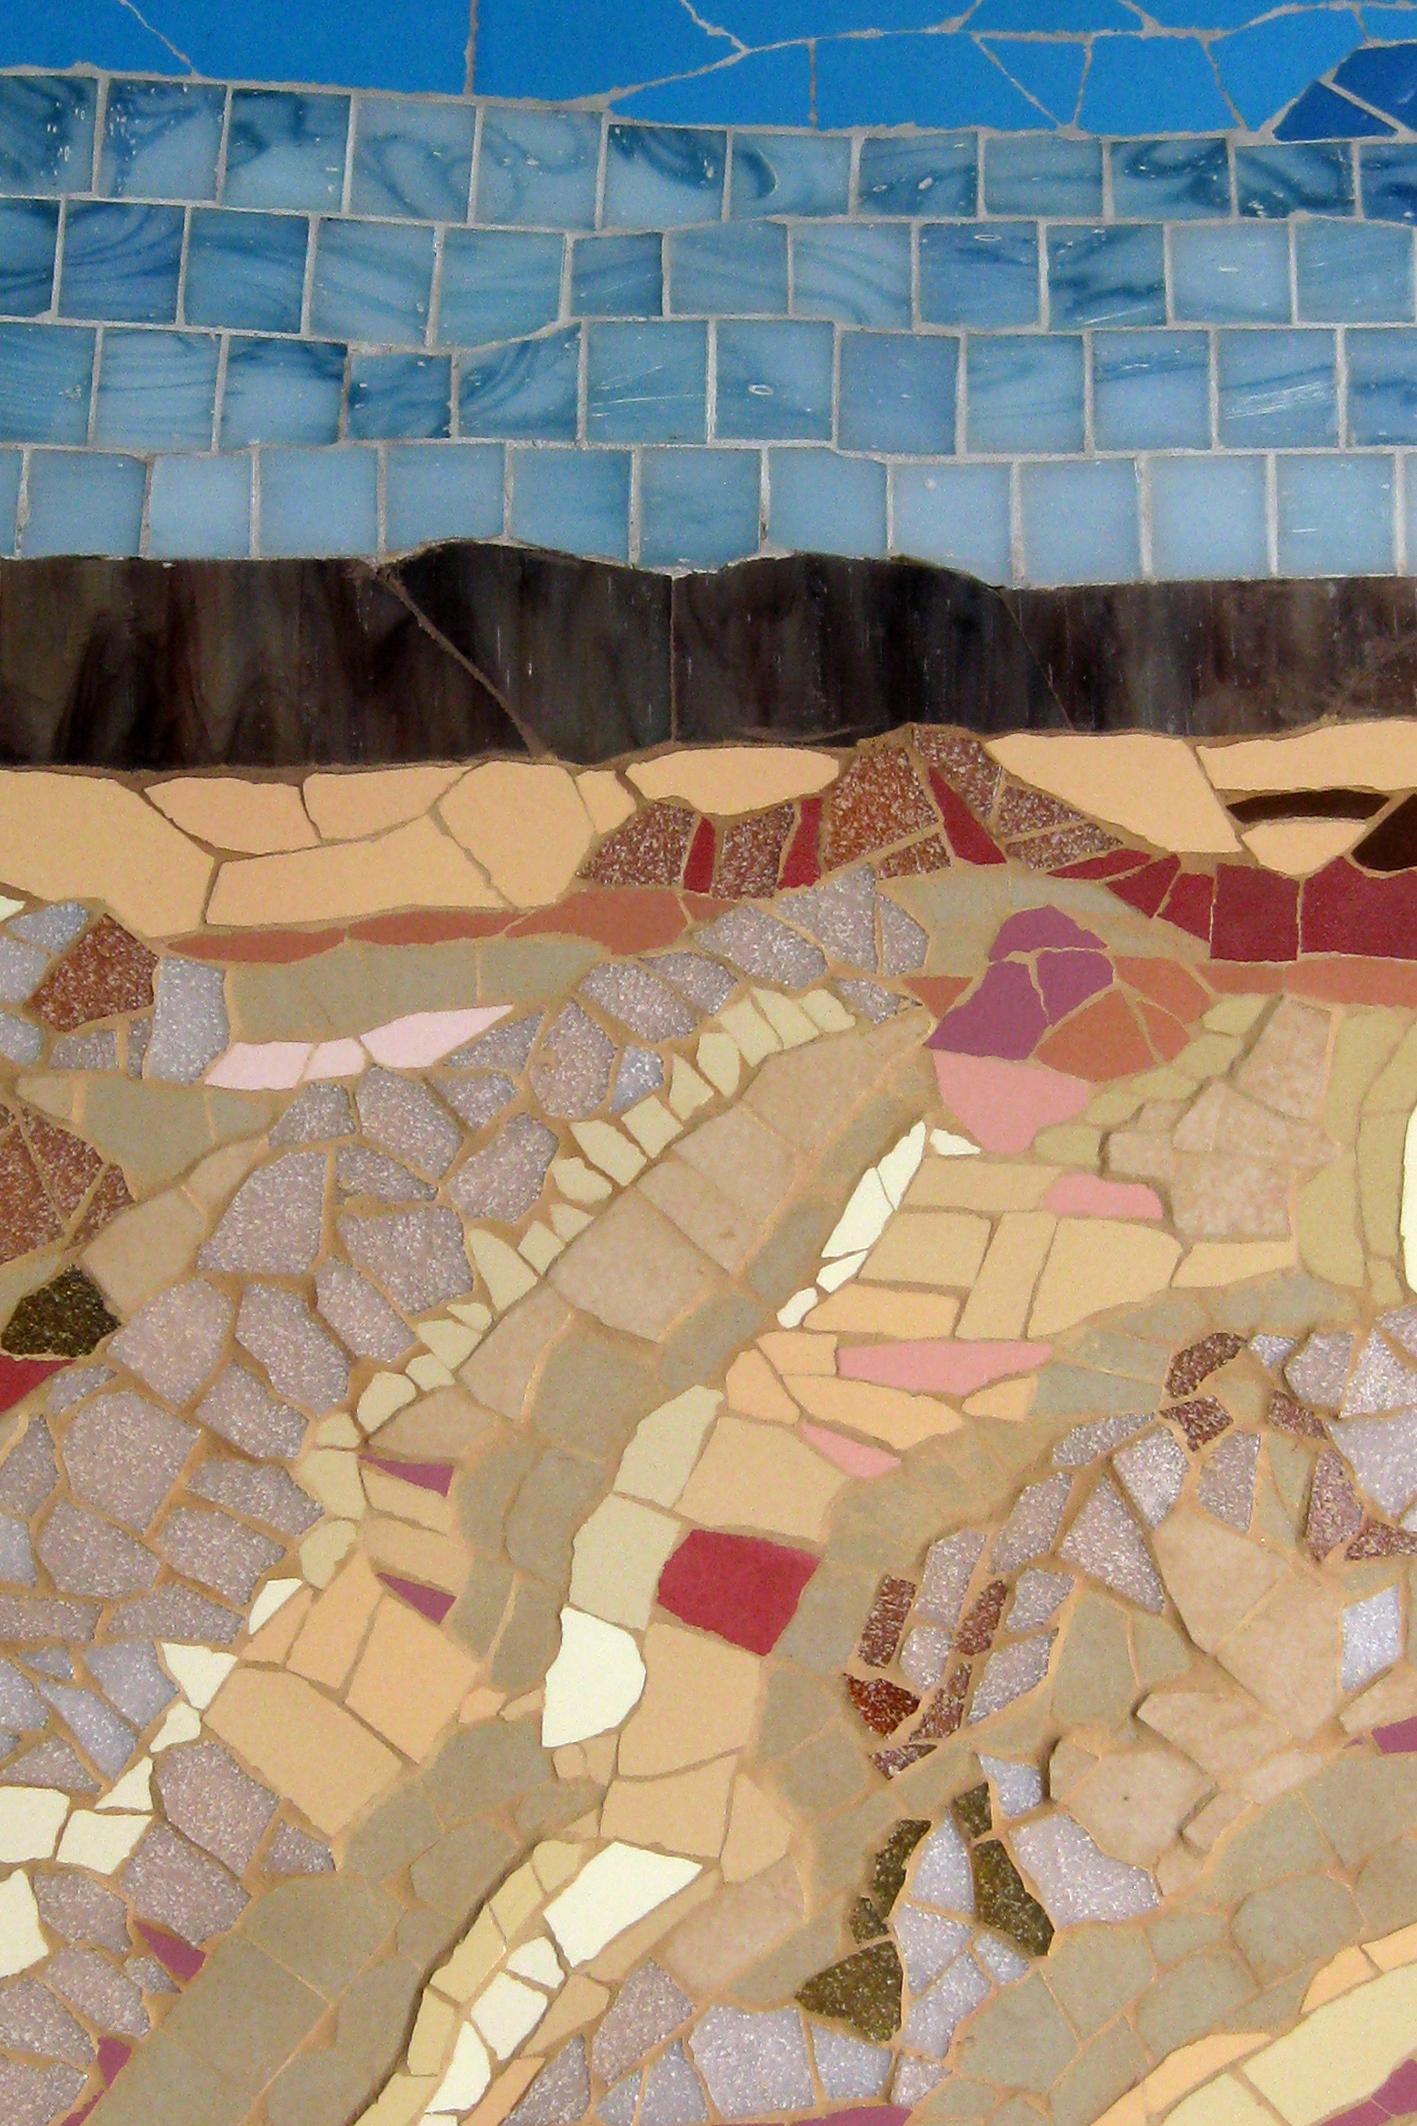 Ceramic One-of-a-Kind Contemporary Mosaic ML1701 by Brazilian Artist Mariana Lloyd, 2020 For Sale